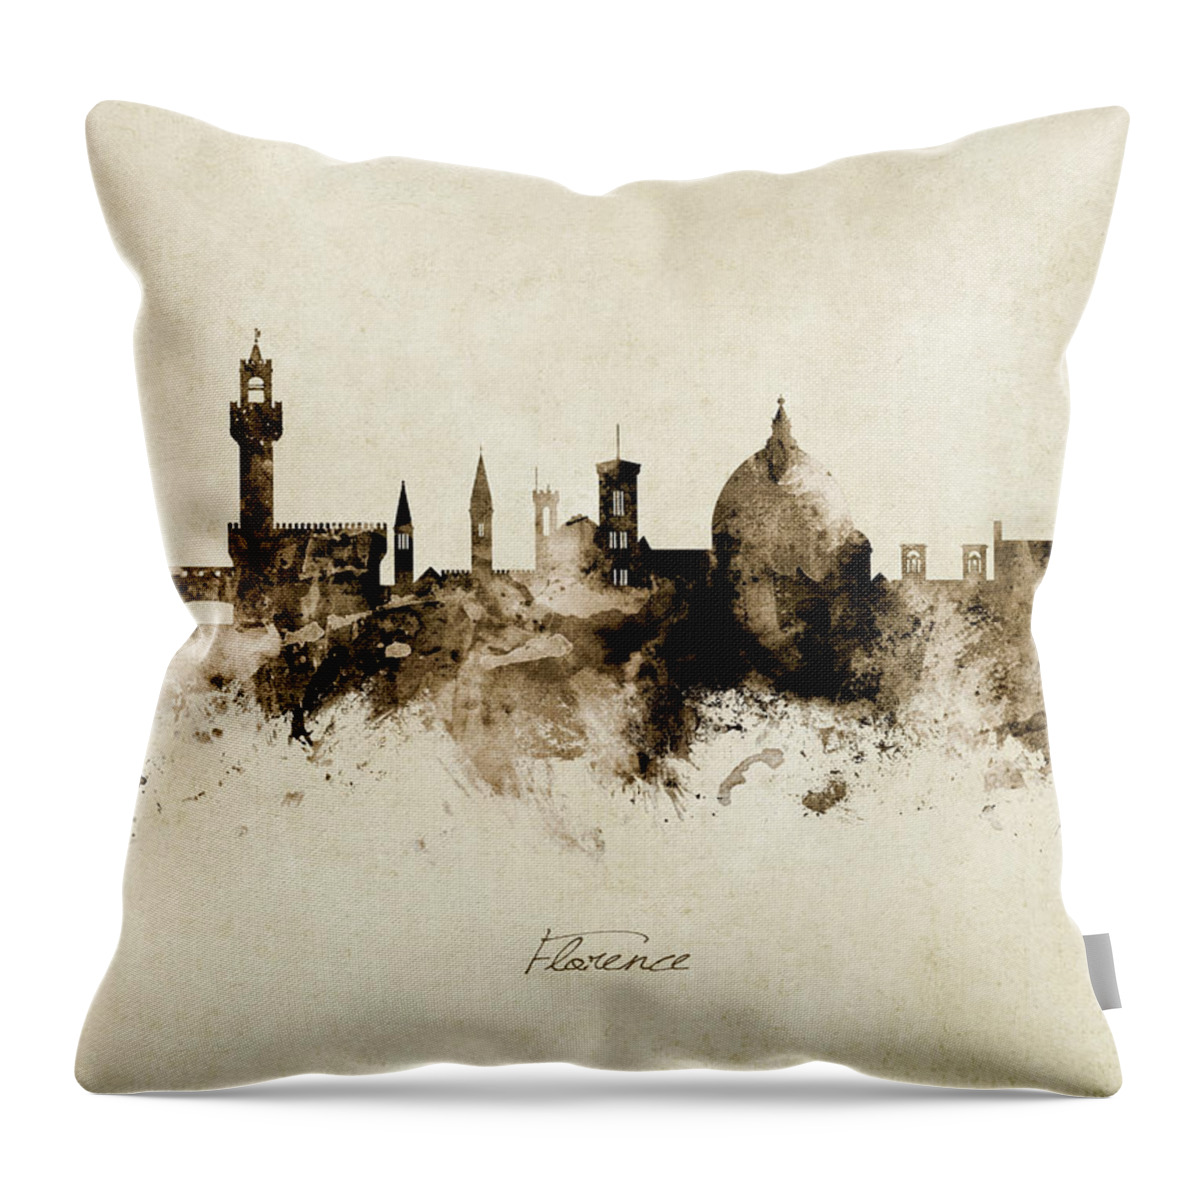 Florence Throw Pillow featuring the digital art Florence Italy Skyline #19 by Michael Tompsett